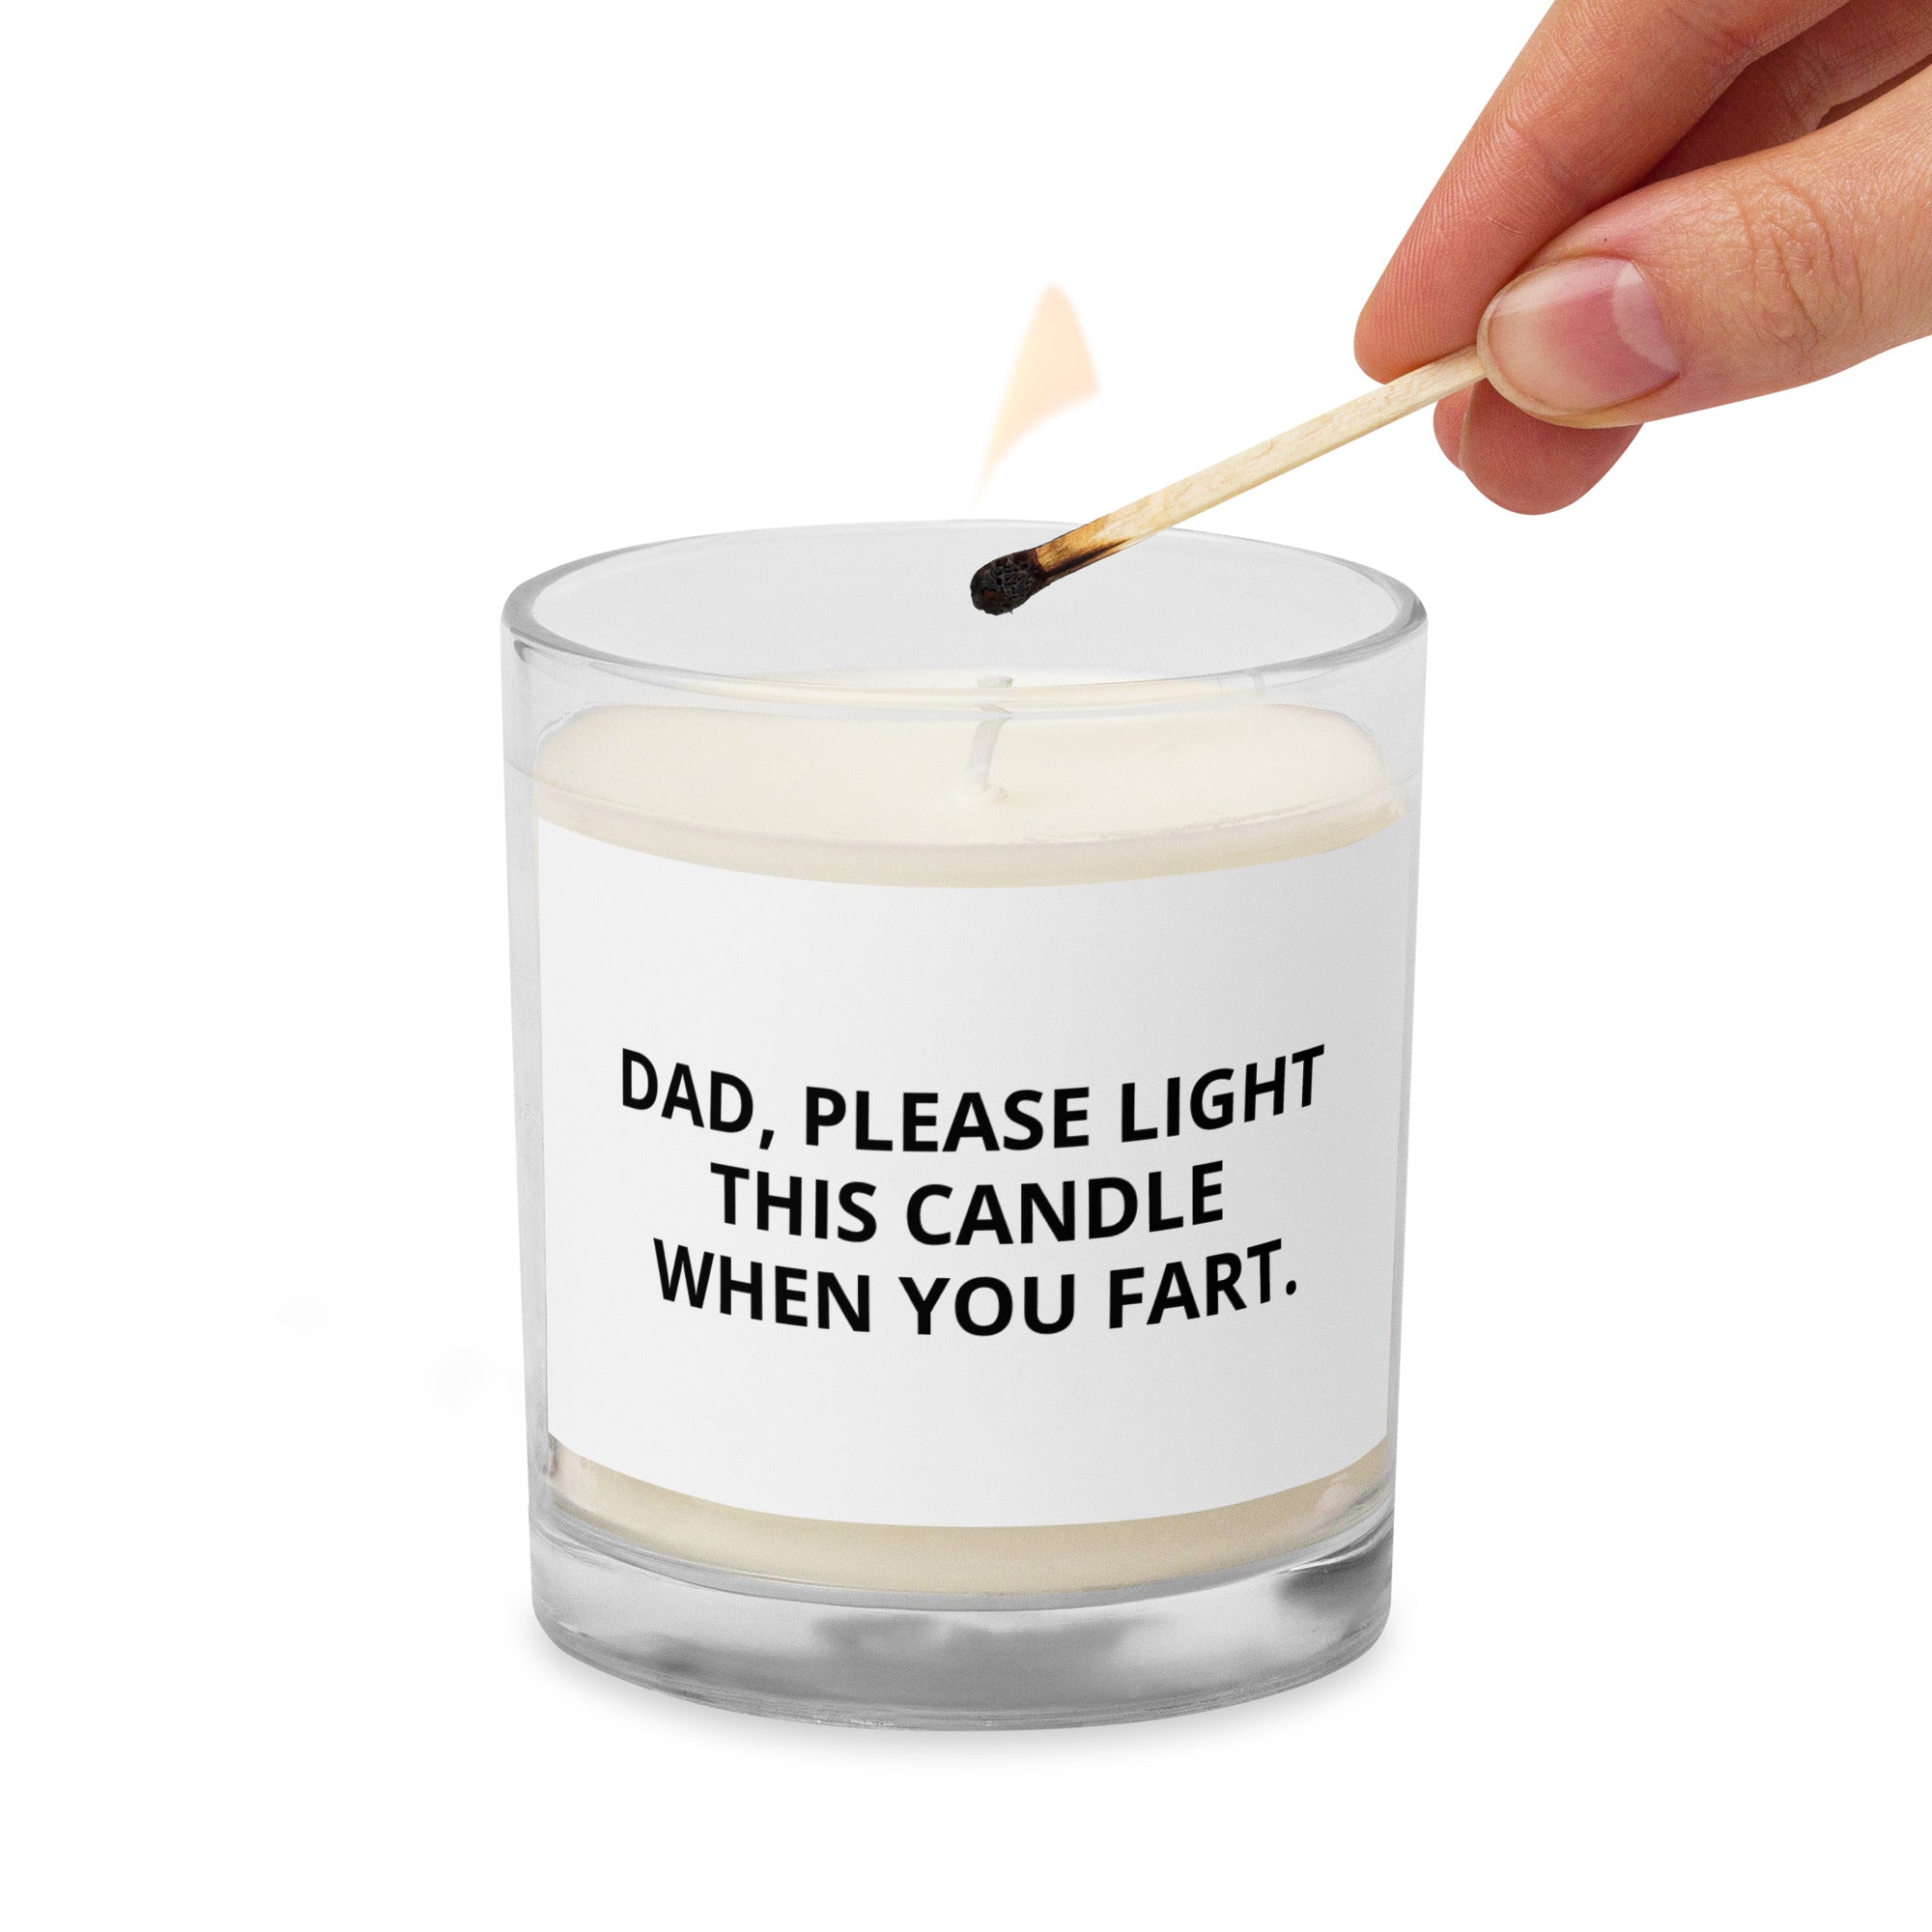 DAD, LIGHT THIS CANDLE WHEN YOU FART Glass jar soy wax candle